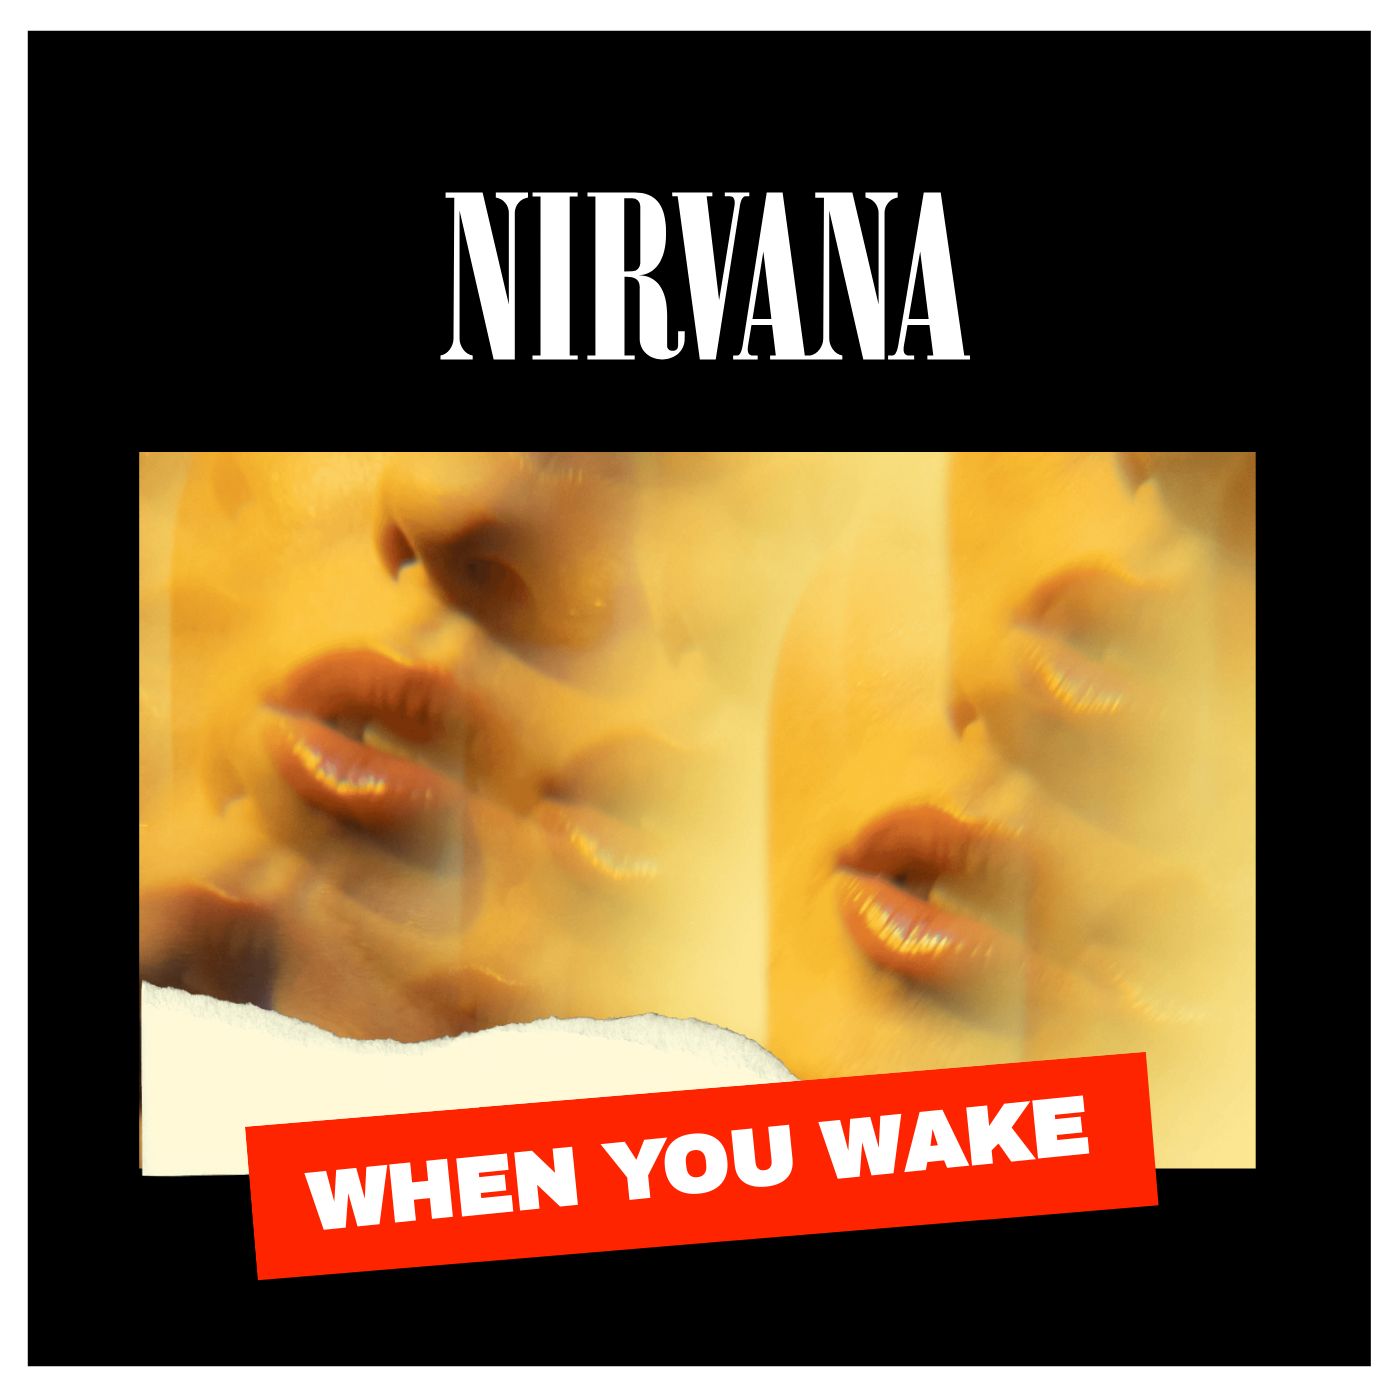 Nirvana Album Cover in Word, Google Docs, Illustrator, PSD, Apple Pages, Publisher